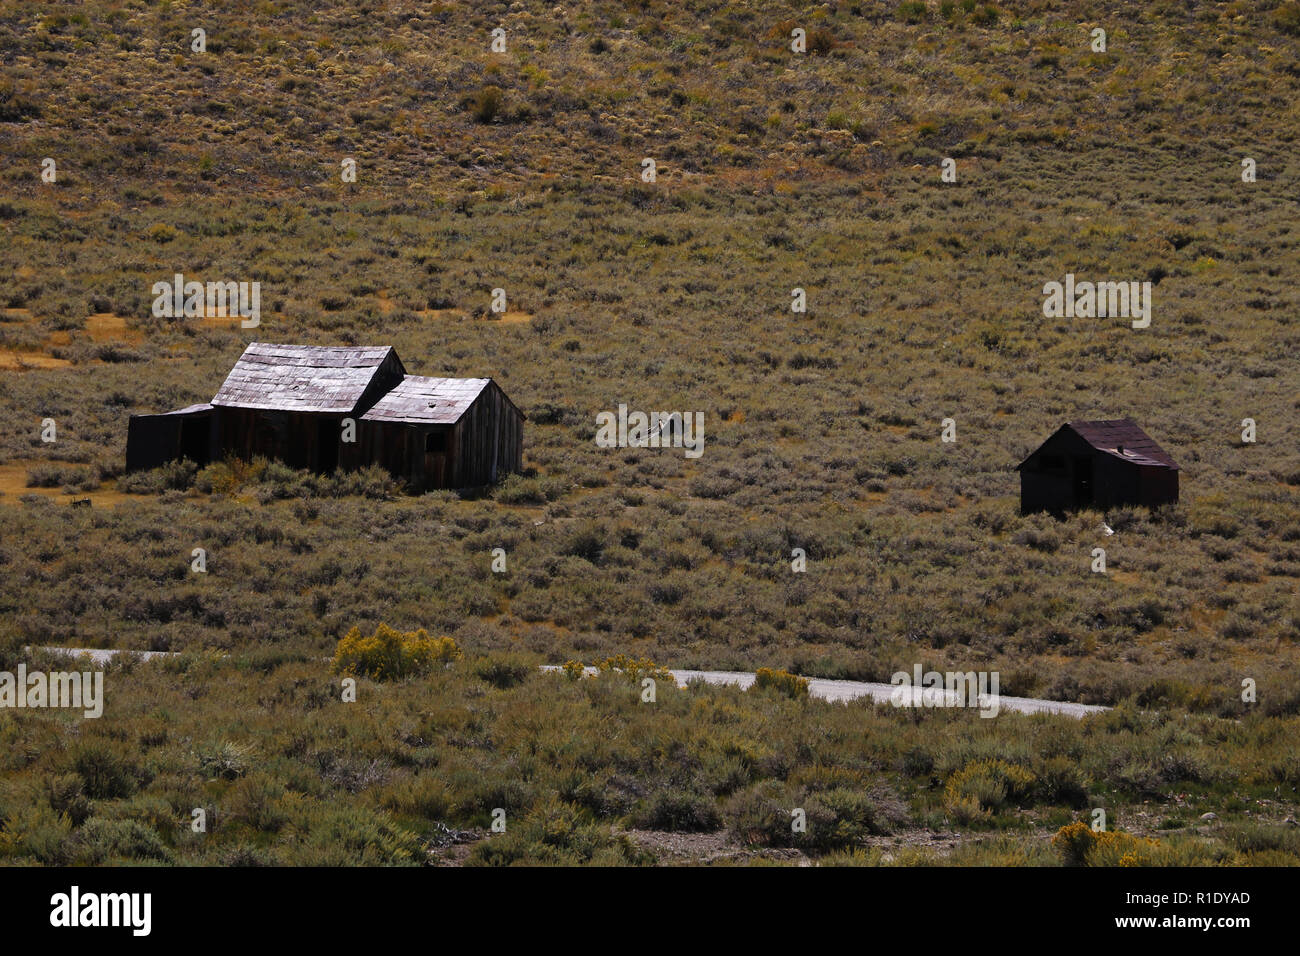 Abandoned houses in the desert after the gold rush, Bodie, Ghost Town, California Stock Photo